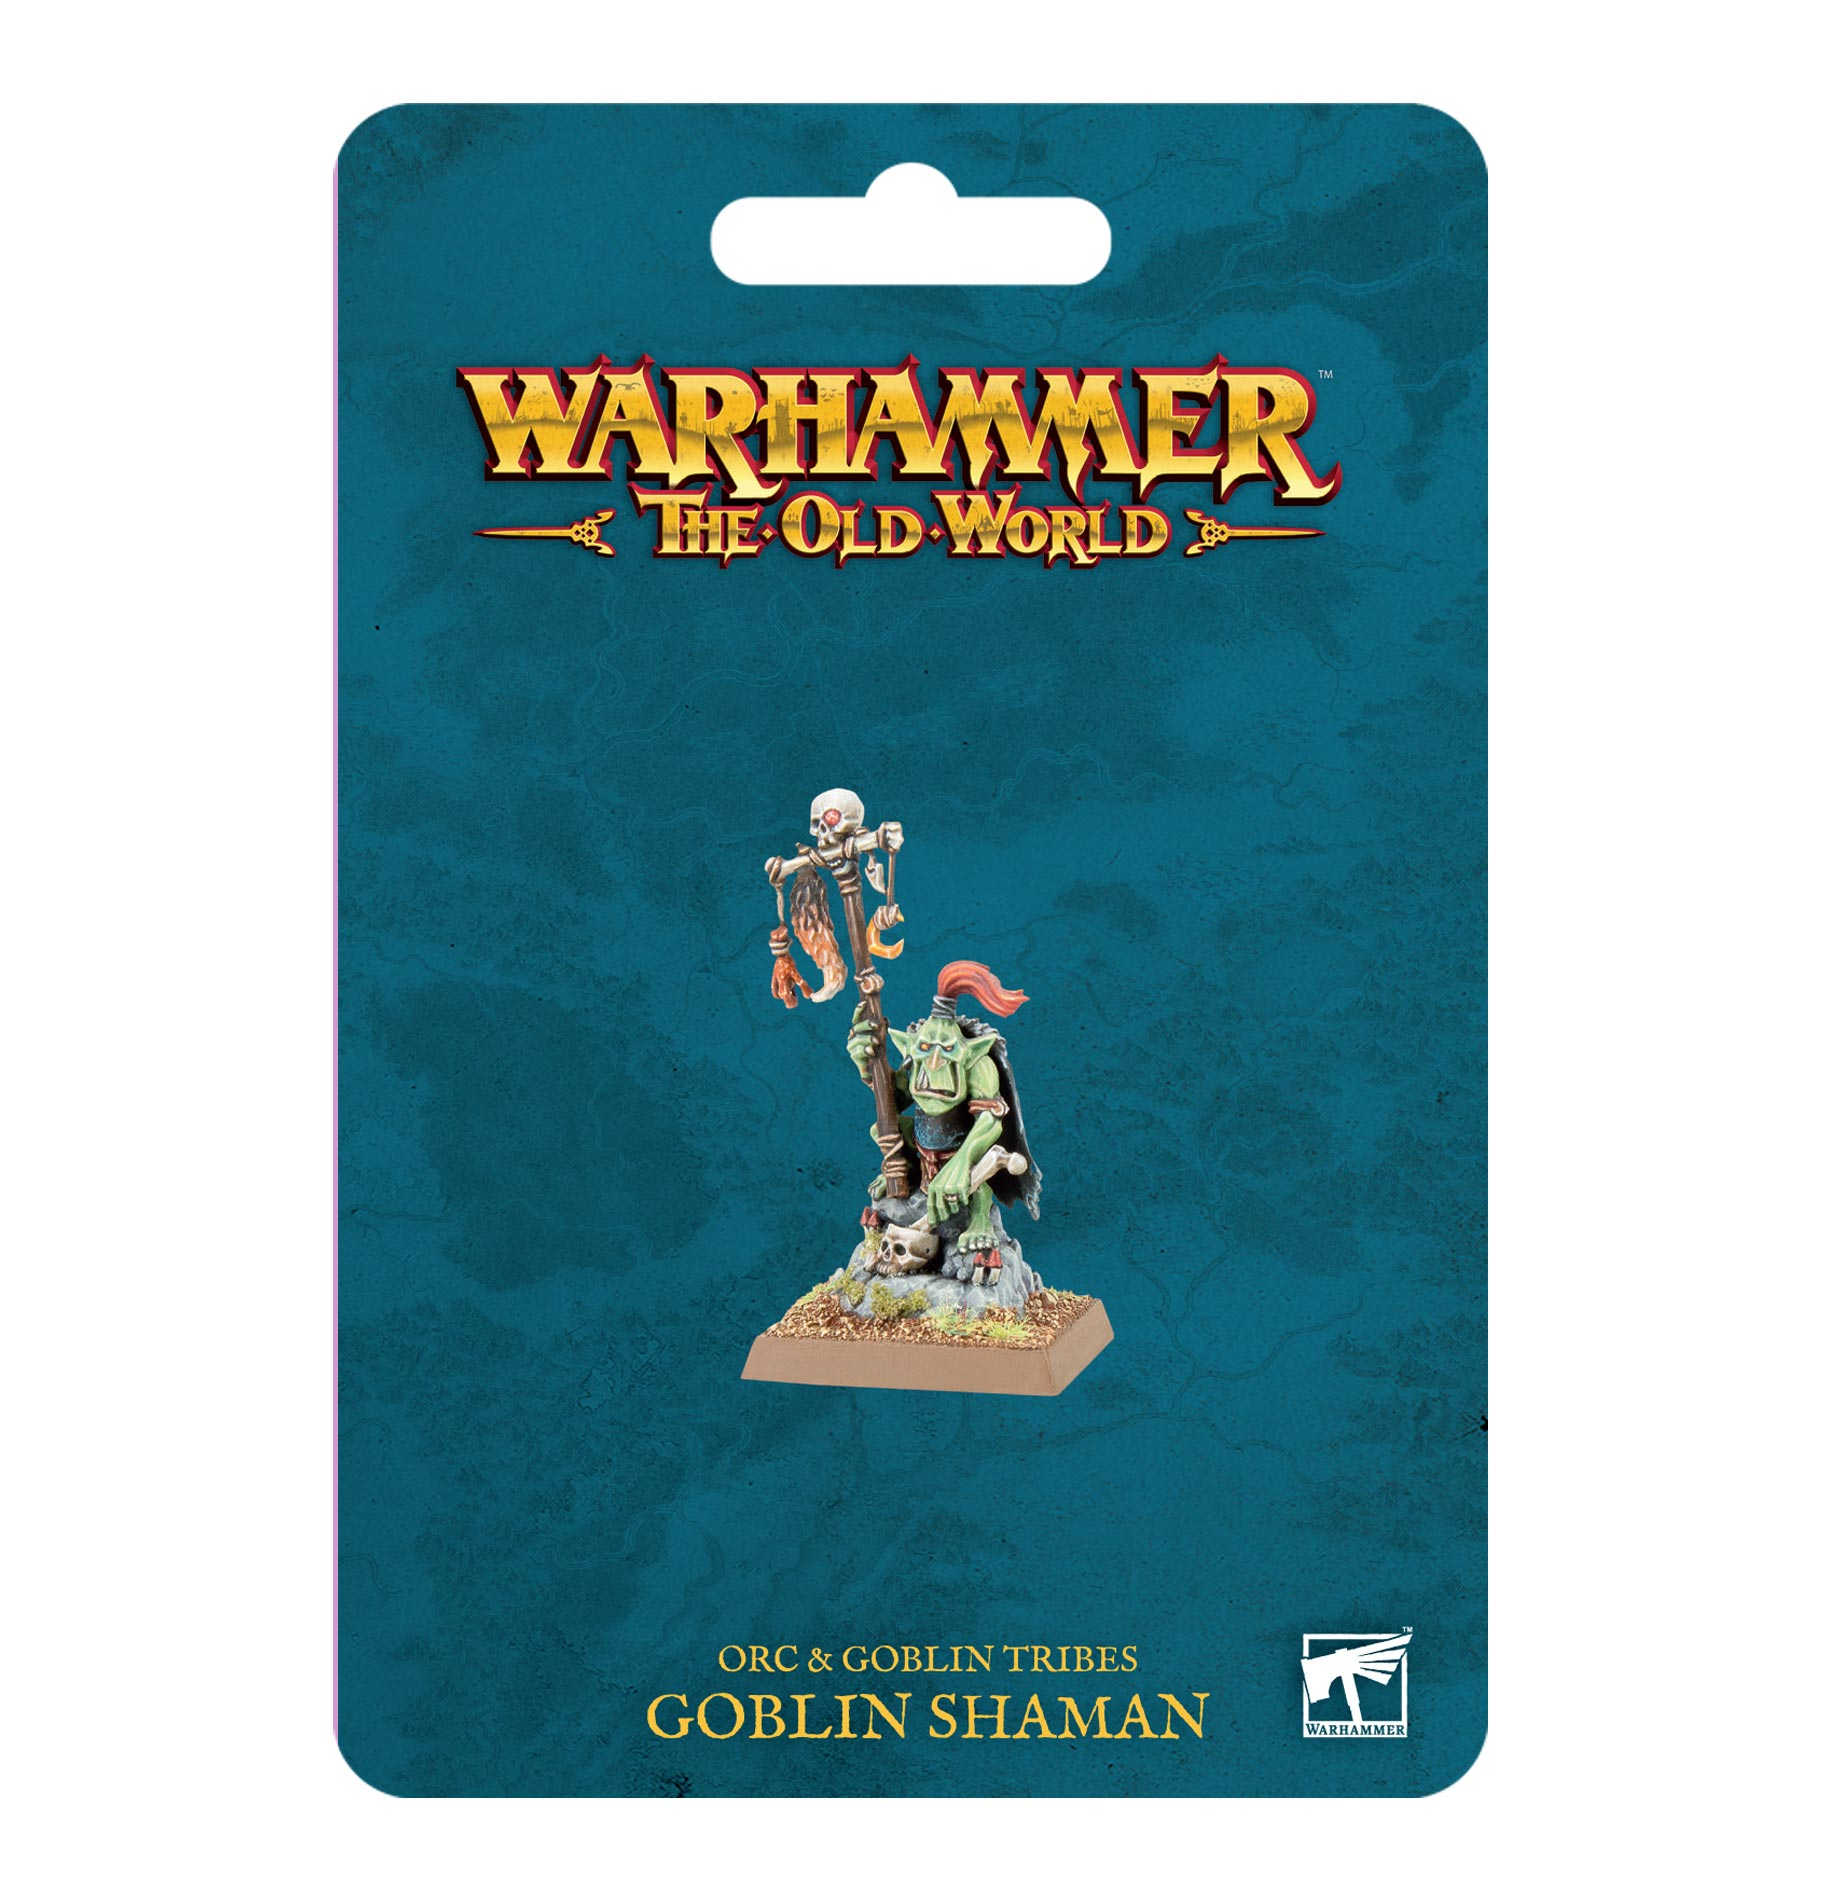 Orc & Goblin Tribes: Goblin Shaman - Release Date 4/5/24 - Loaded Dice